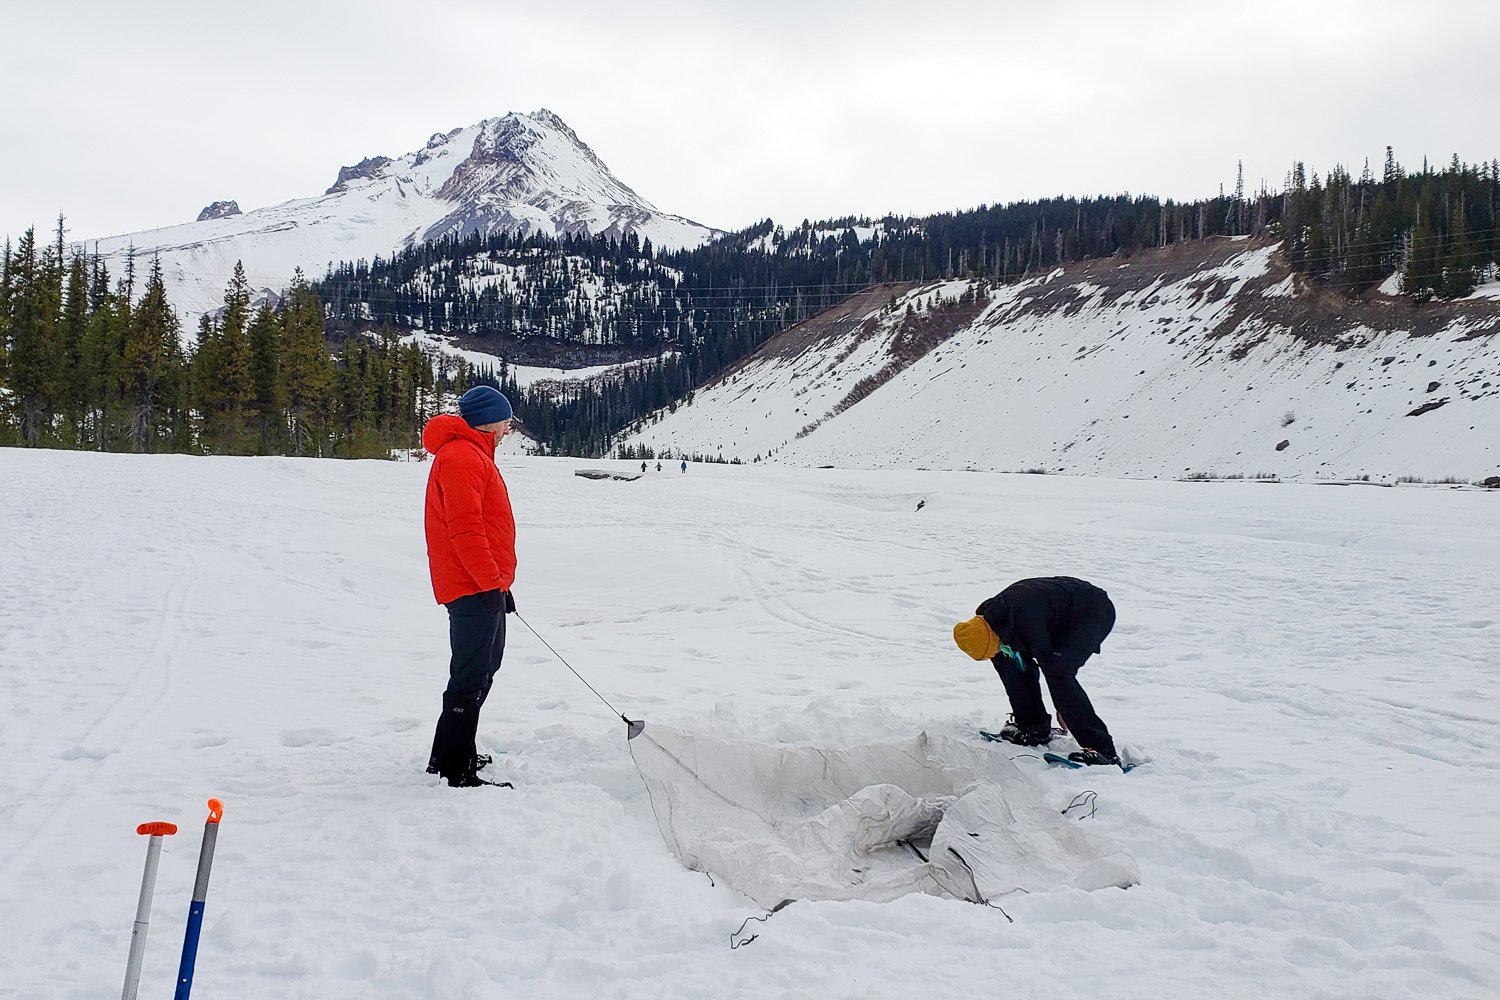 Two hikers setting up a tent in the snow with a mountain in the background